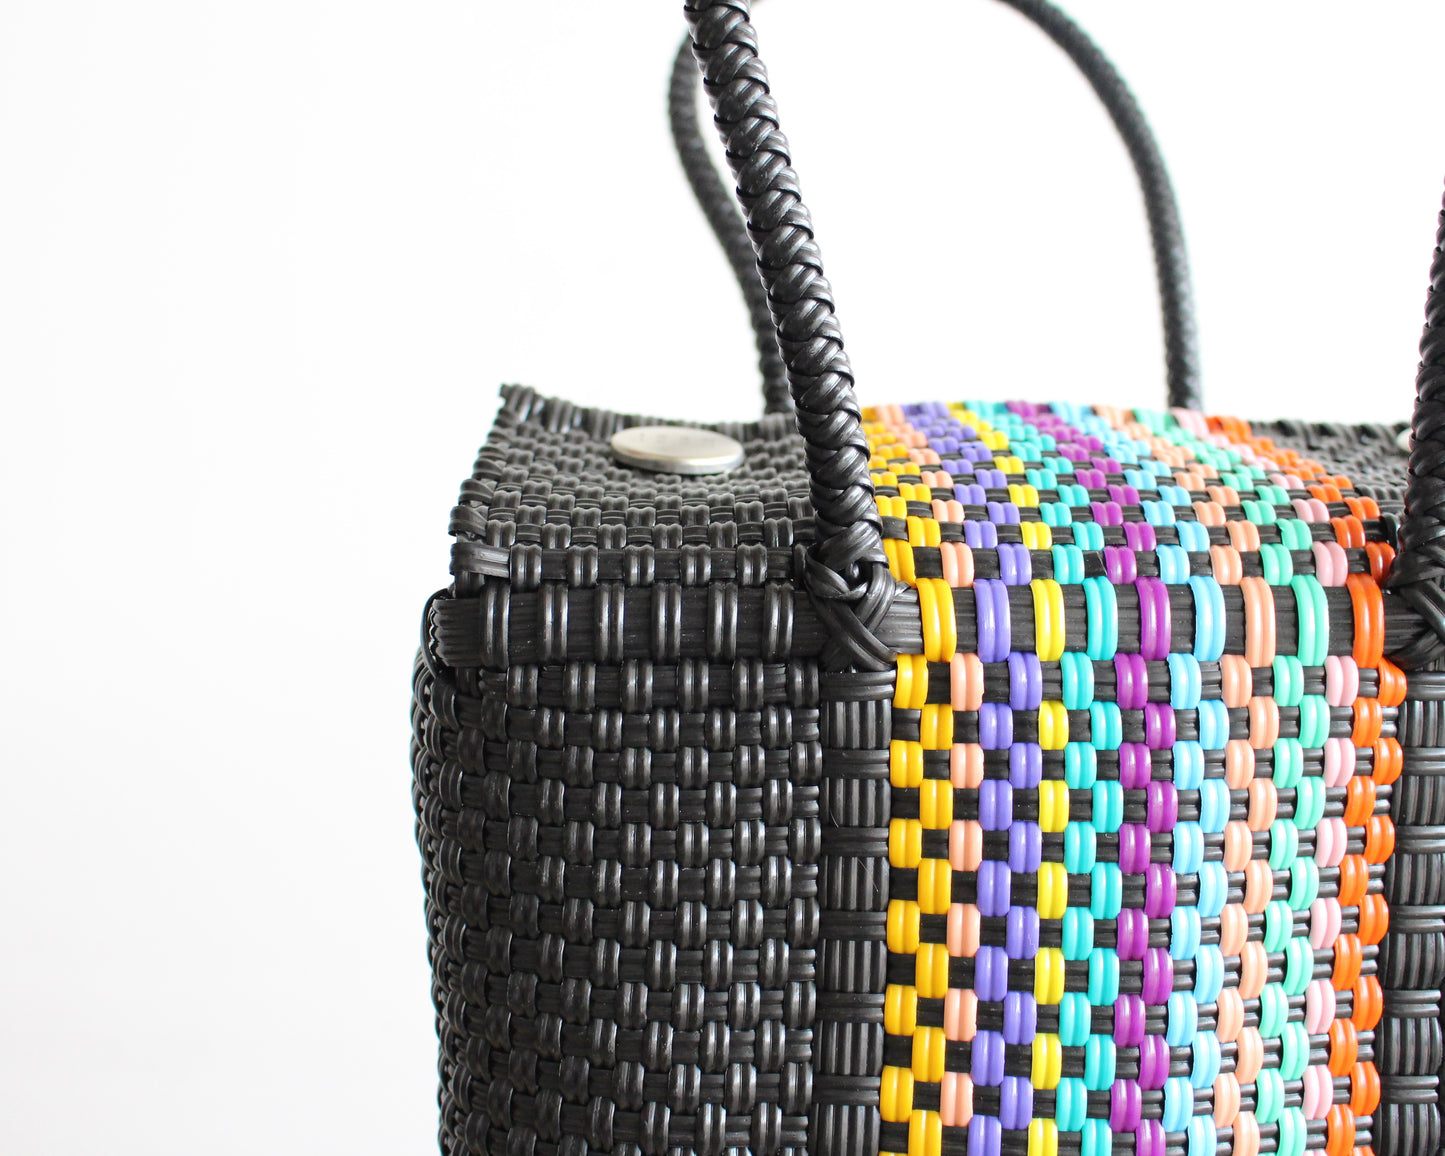 Black with colors Handbag by MexiMexi